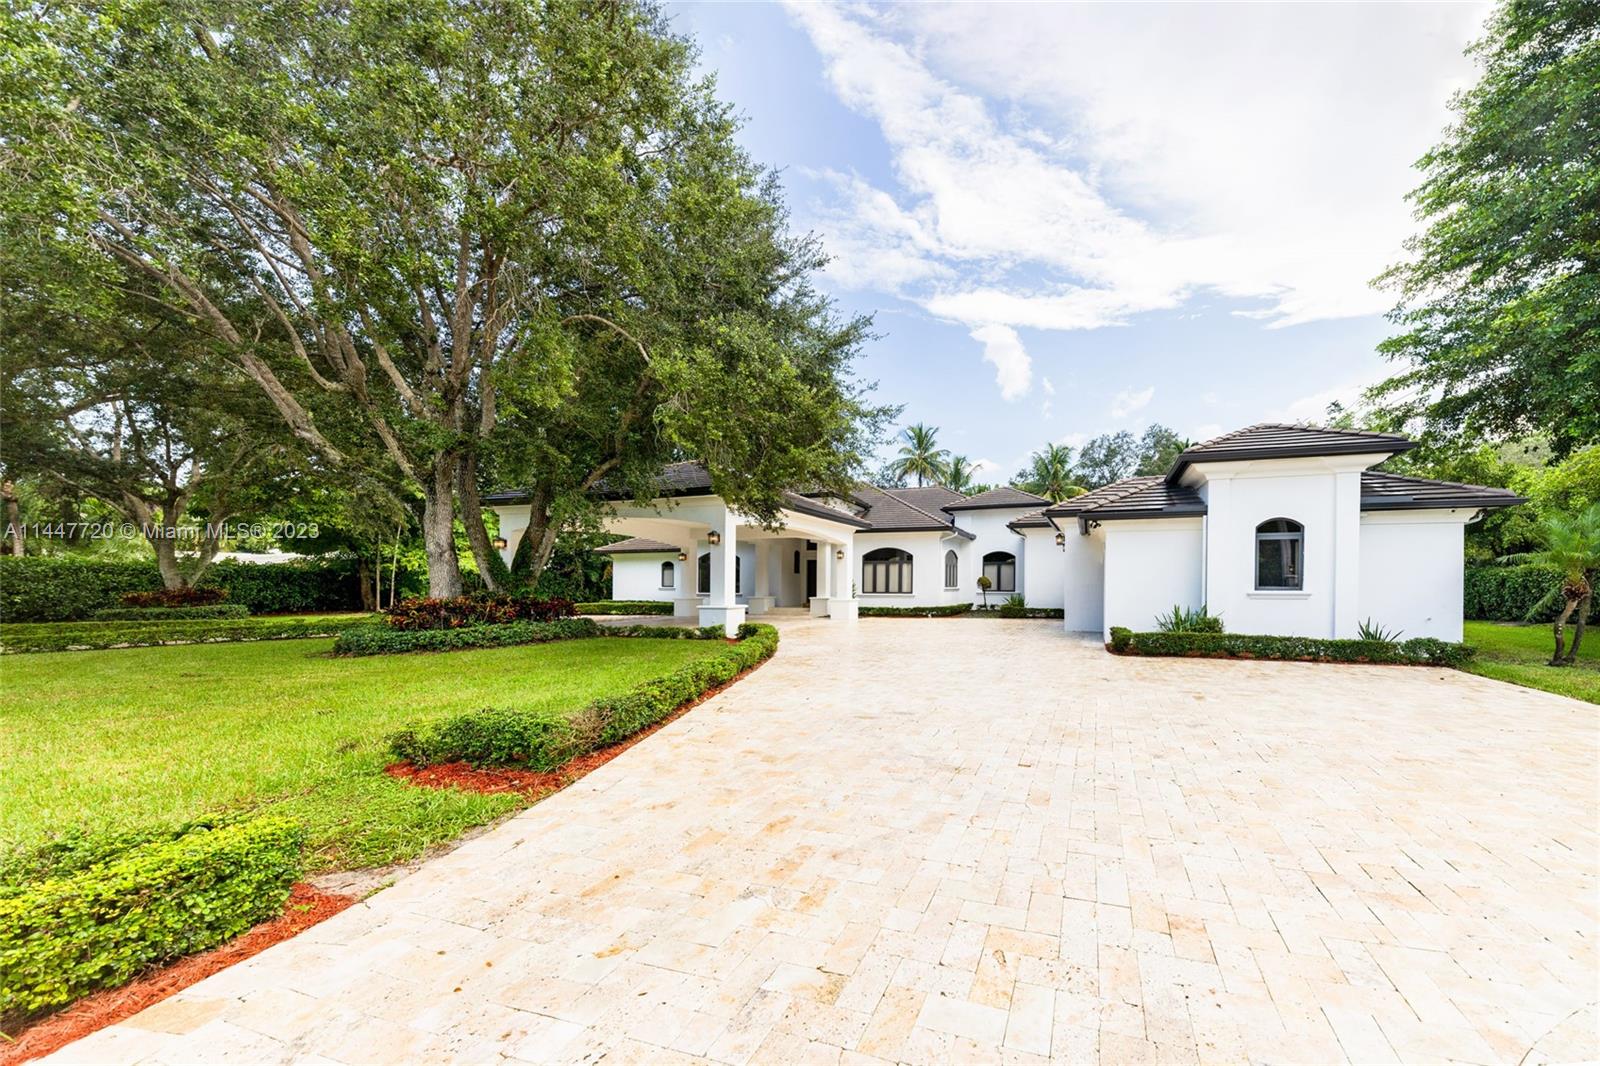 Stunning, completely remodeled 5BD/5.5BR entertainer's dream. One story luxury in the heart of Pinecrest! Stately driveway, hurricane windows, landscaping, & modern exterior paint are just a few of the WOW factors as you pull up. Inside the voluminous open floor plan allows for a space everyone can enjoy with abundant natural light. Chef inspired gourmet kitchen with upgraded modern cabinets, new built-in appliances & center island. This 7,971 Sqft home on a 40,949 Sqft Lot includes custom tilework throughout, plenty of storage & marble counters, spacious bedrooms & luxury bathrooms that inspire spa baths & long showers. Outside, the backyard is an oasis with sprawling patio, private in-ground pool, spa, and lots of space for kids and pets. Tour & Fall in Love!!